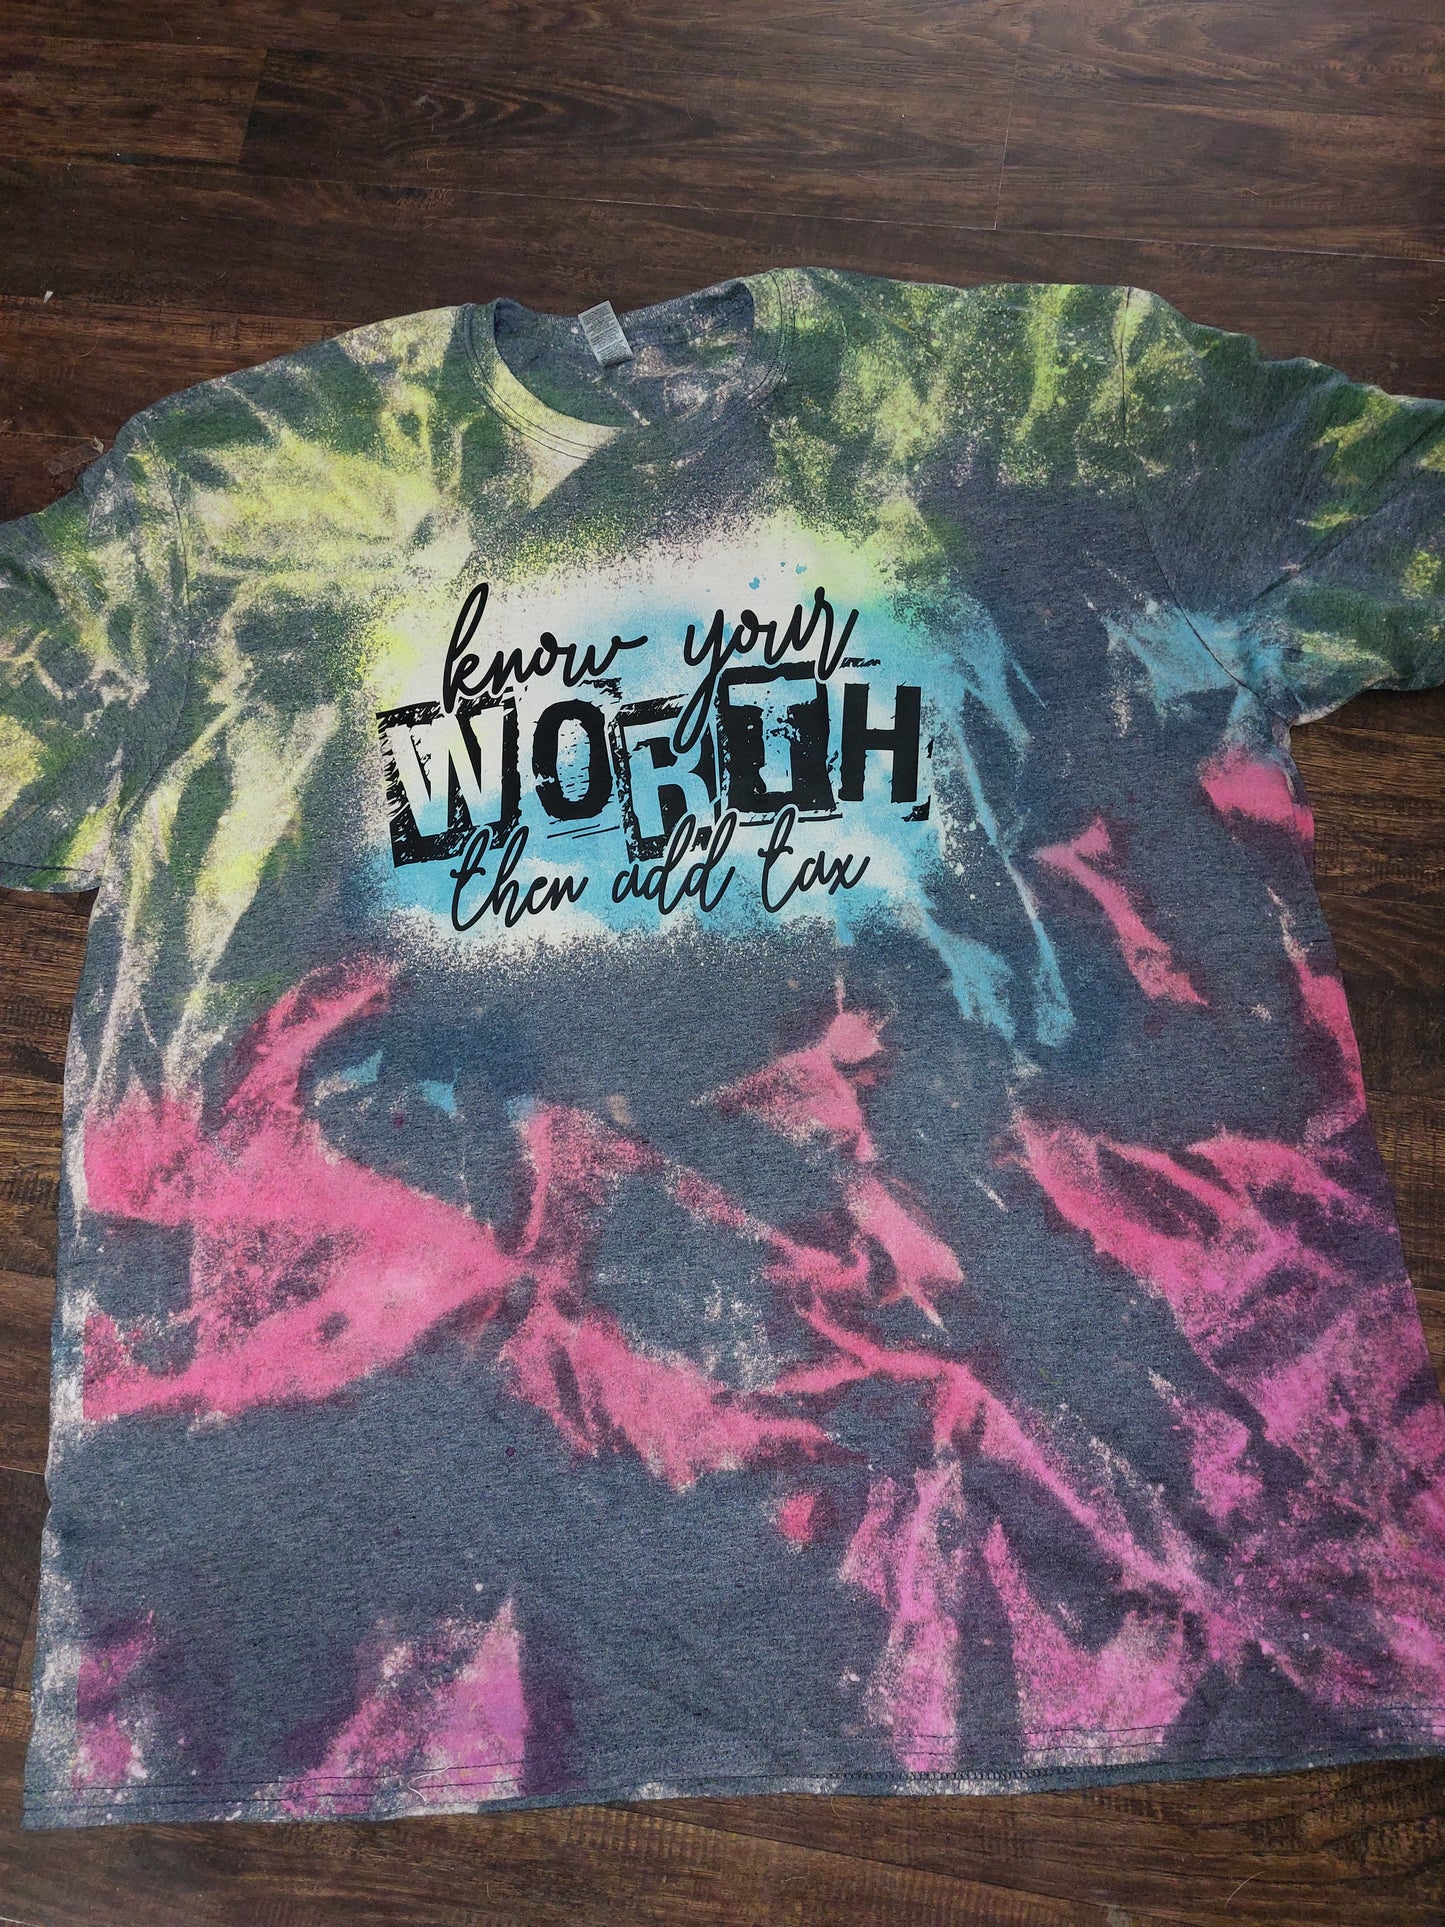 Know your worth than add tax bleached tee